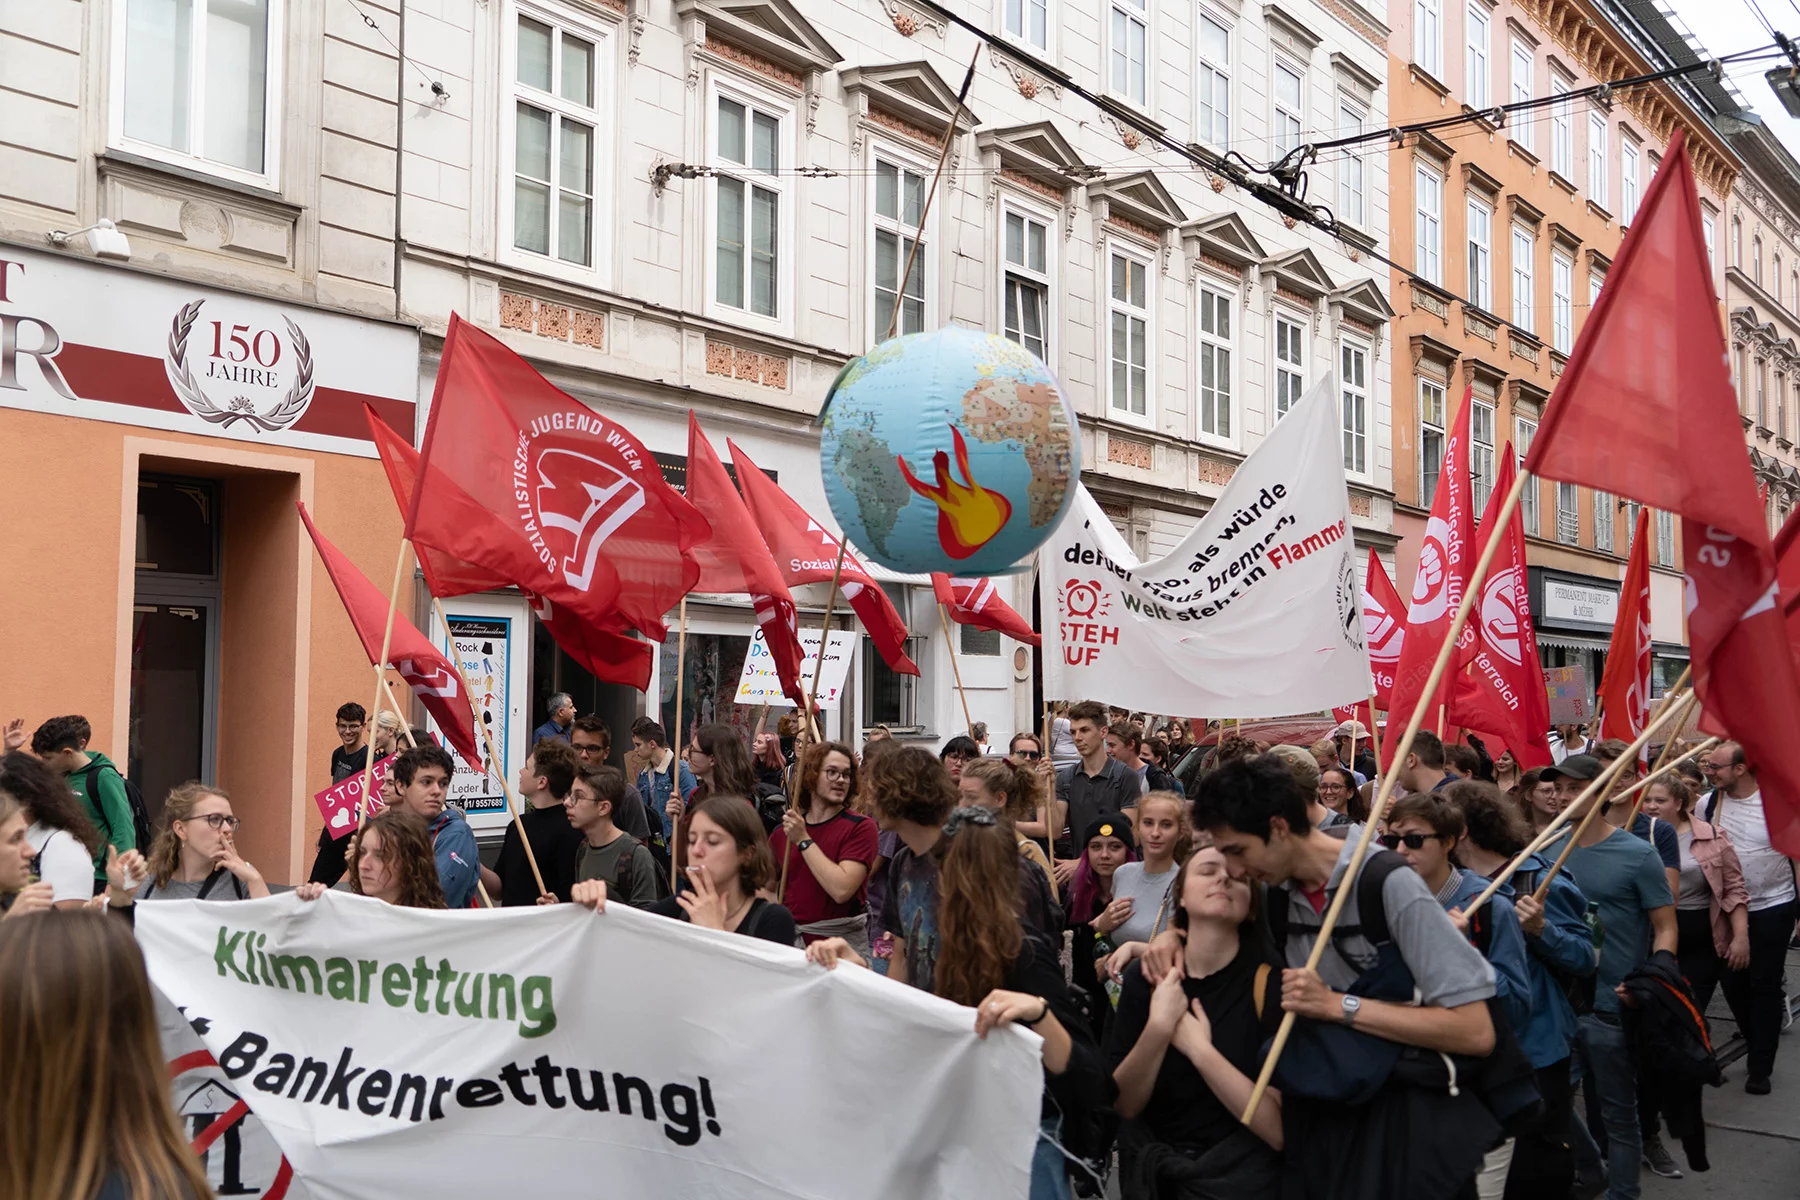 Labor rights activists marching in Vienna